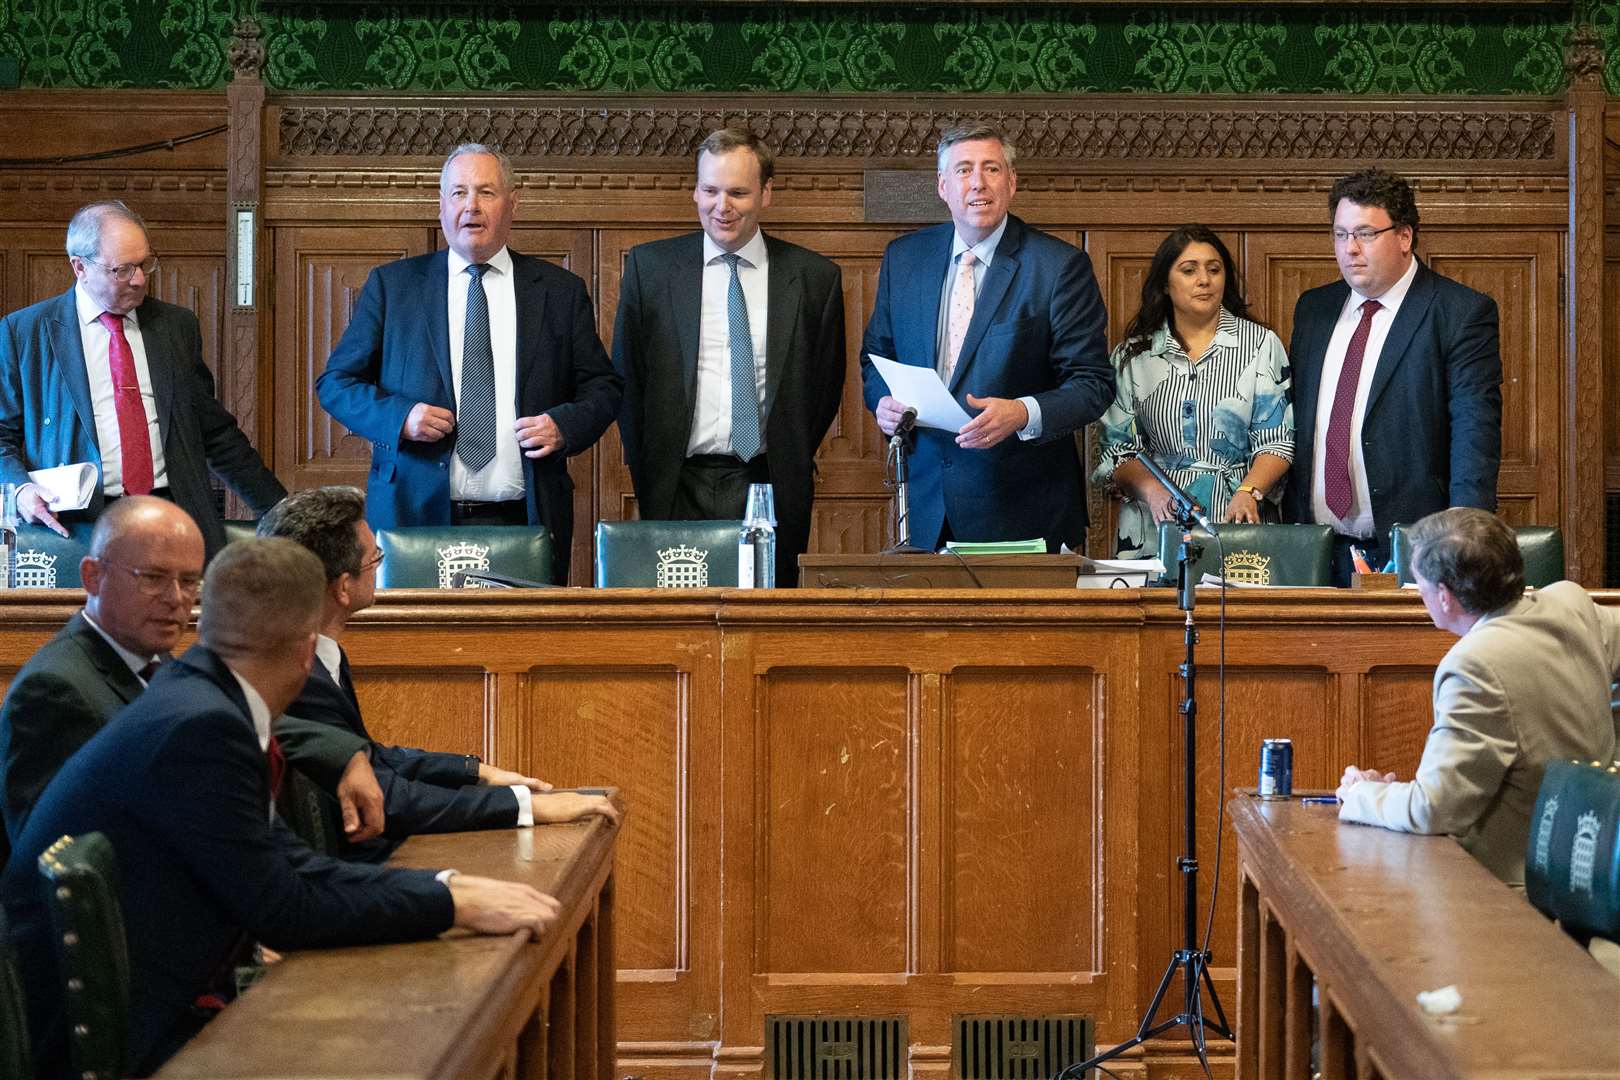 Sir Graham Brady (fourth from left), chairman of the 1922 Committee, announces which hopefuls have won the support of the 20 MPs required to enter into Tory Party leadership contest (Stefan Rousseau/PA)